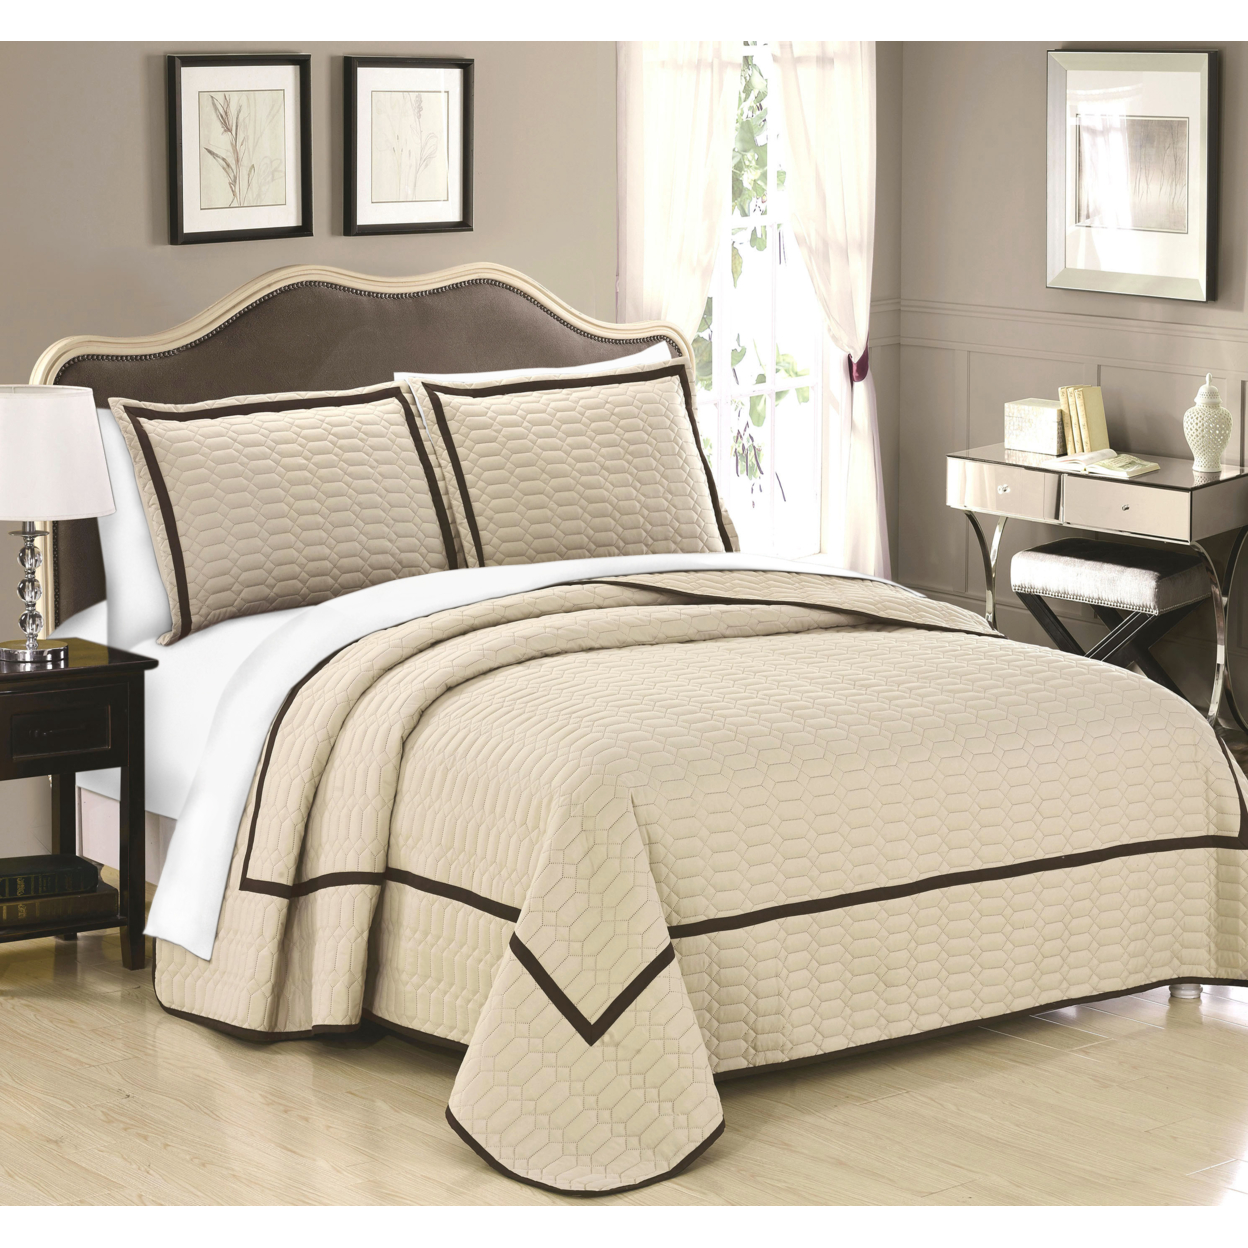 3 Or 2 Piece Halrowe Hotel Collection 2 Tone Banded Quilted Geometrical Embroidered Quilt Set - Beige, King